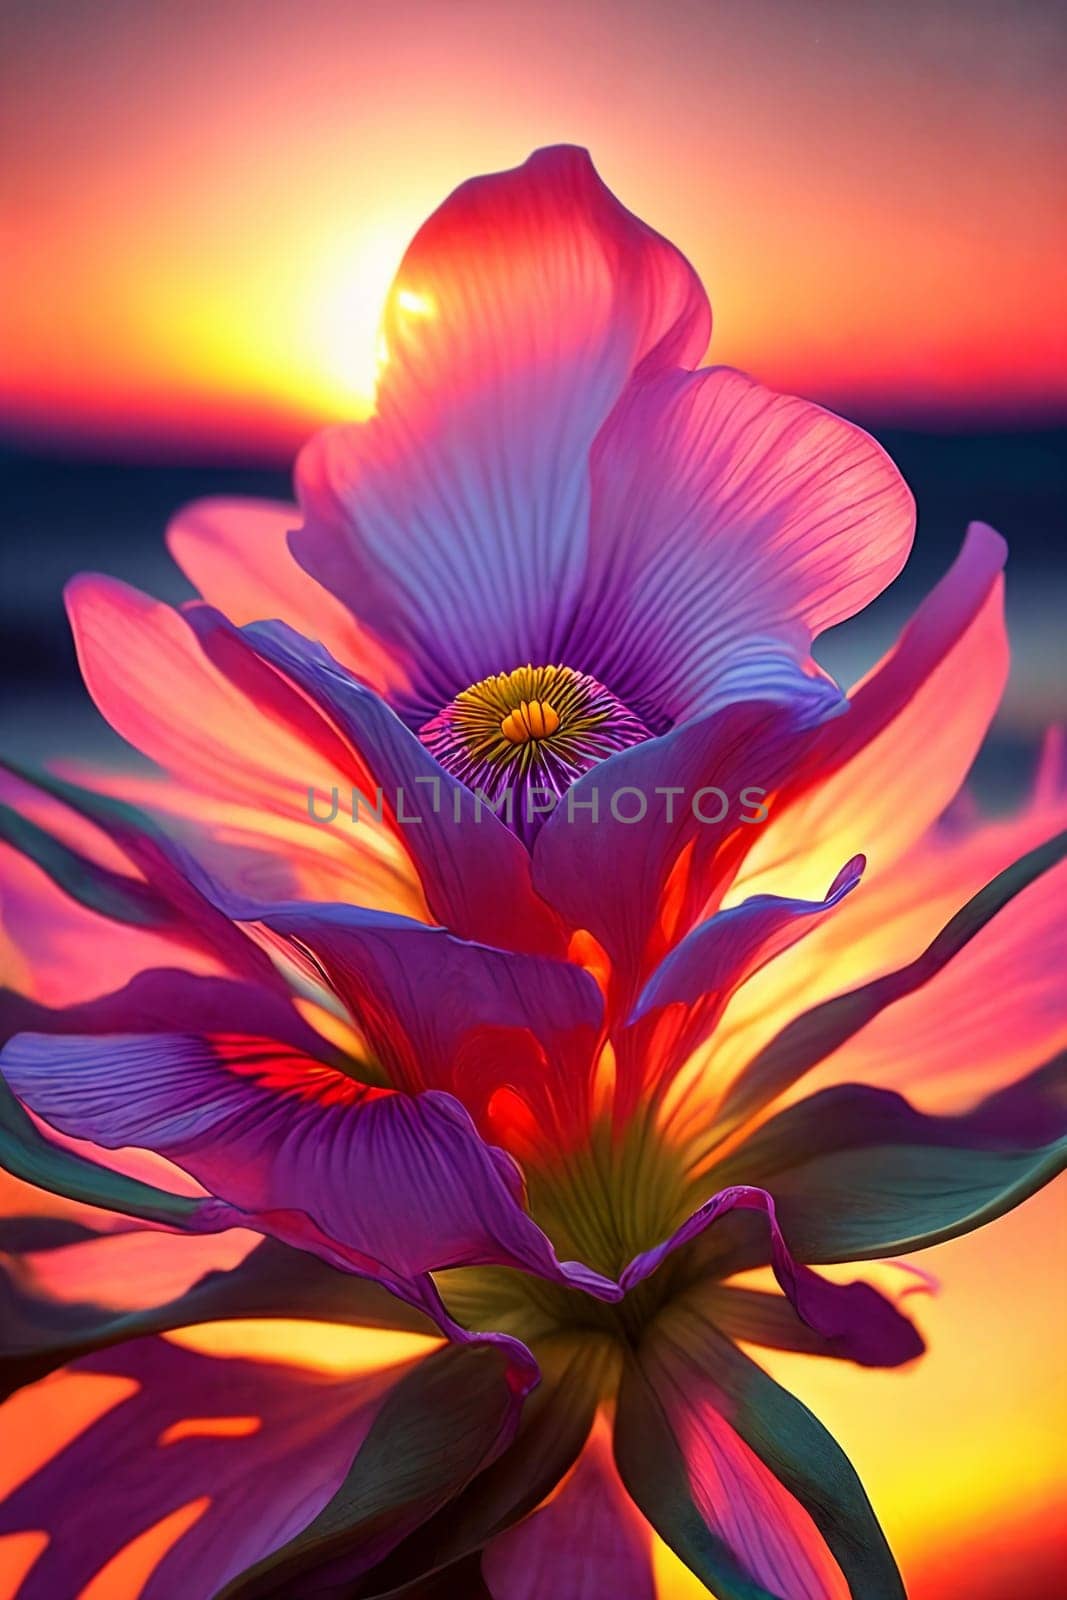 Floral Fantasy. Intricate details of a blooming flower as it catches the last rays of the setting sun, highlighting its delicate petals and vibrant colors in a dreamy, ethereal light.